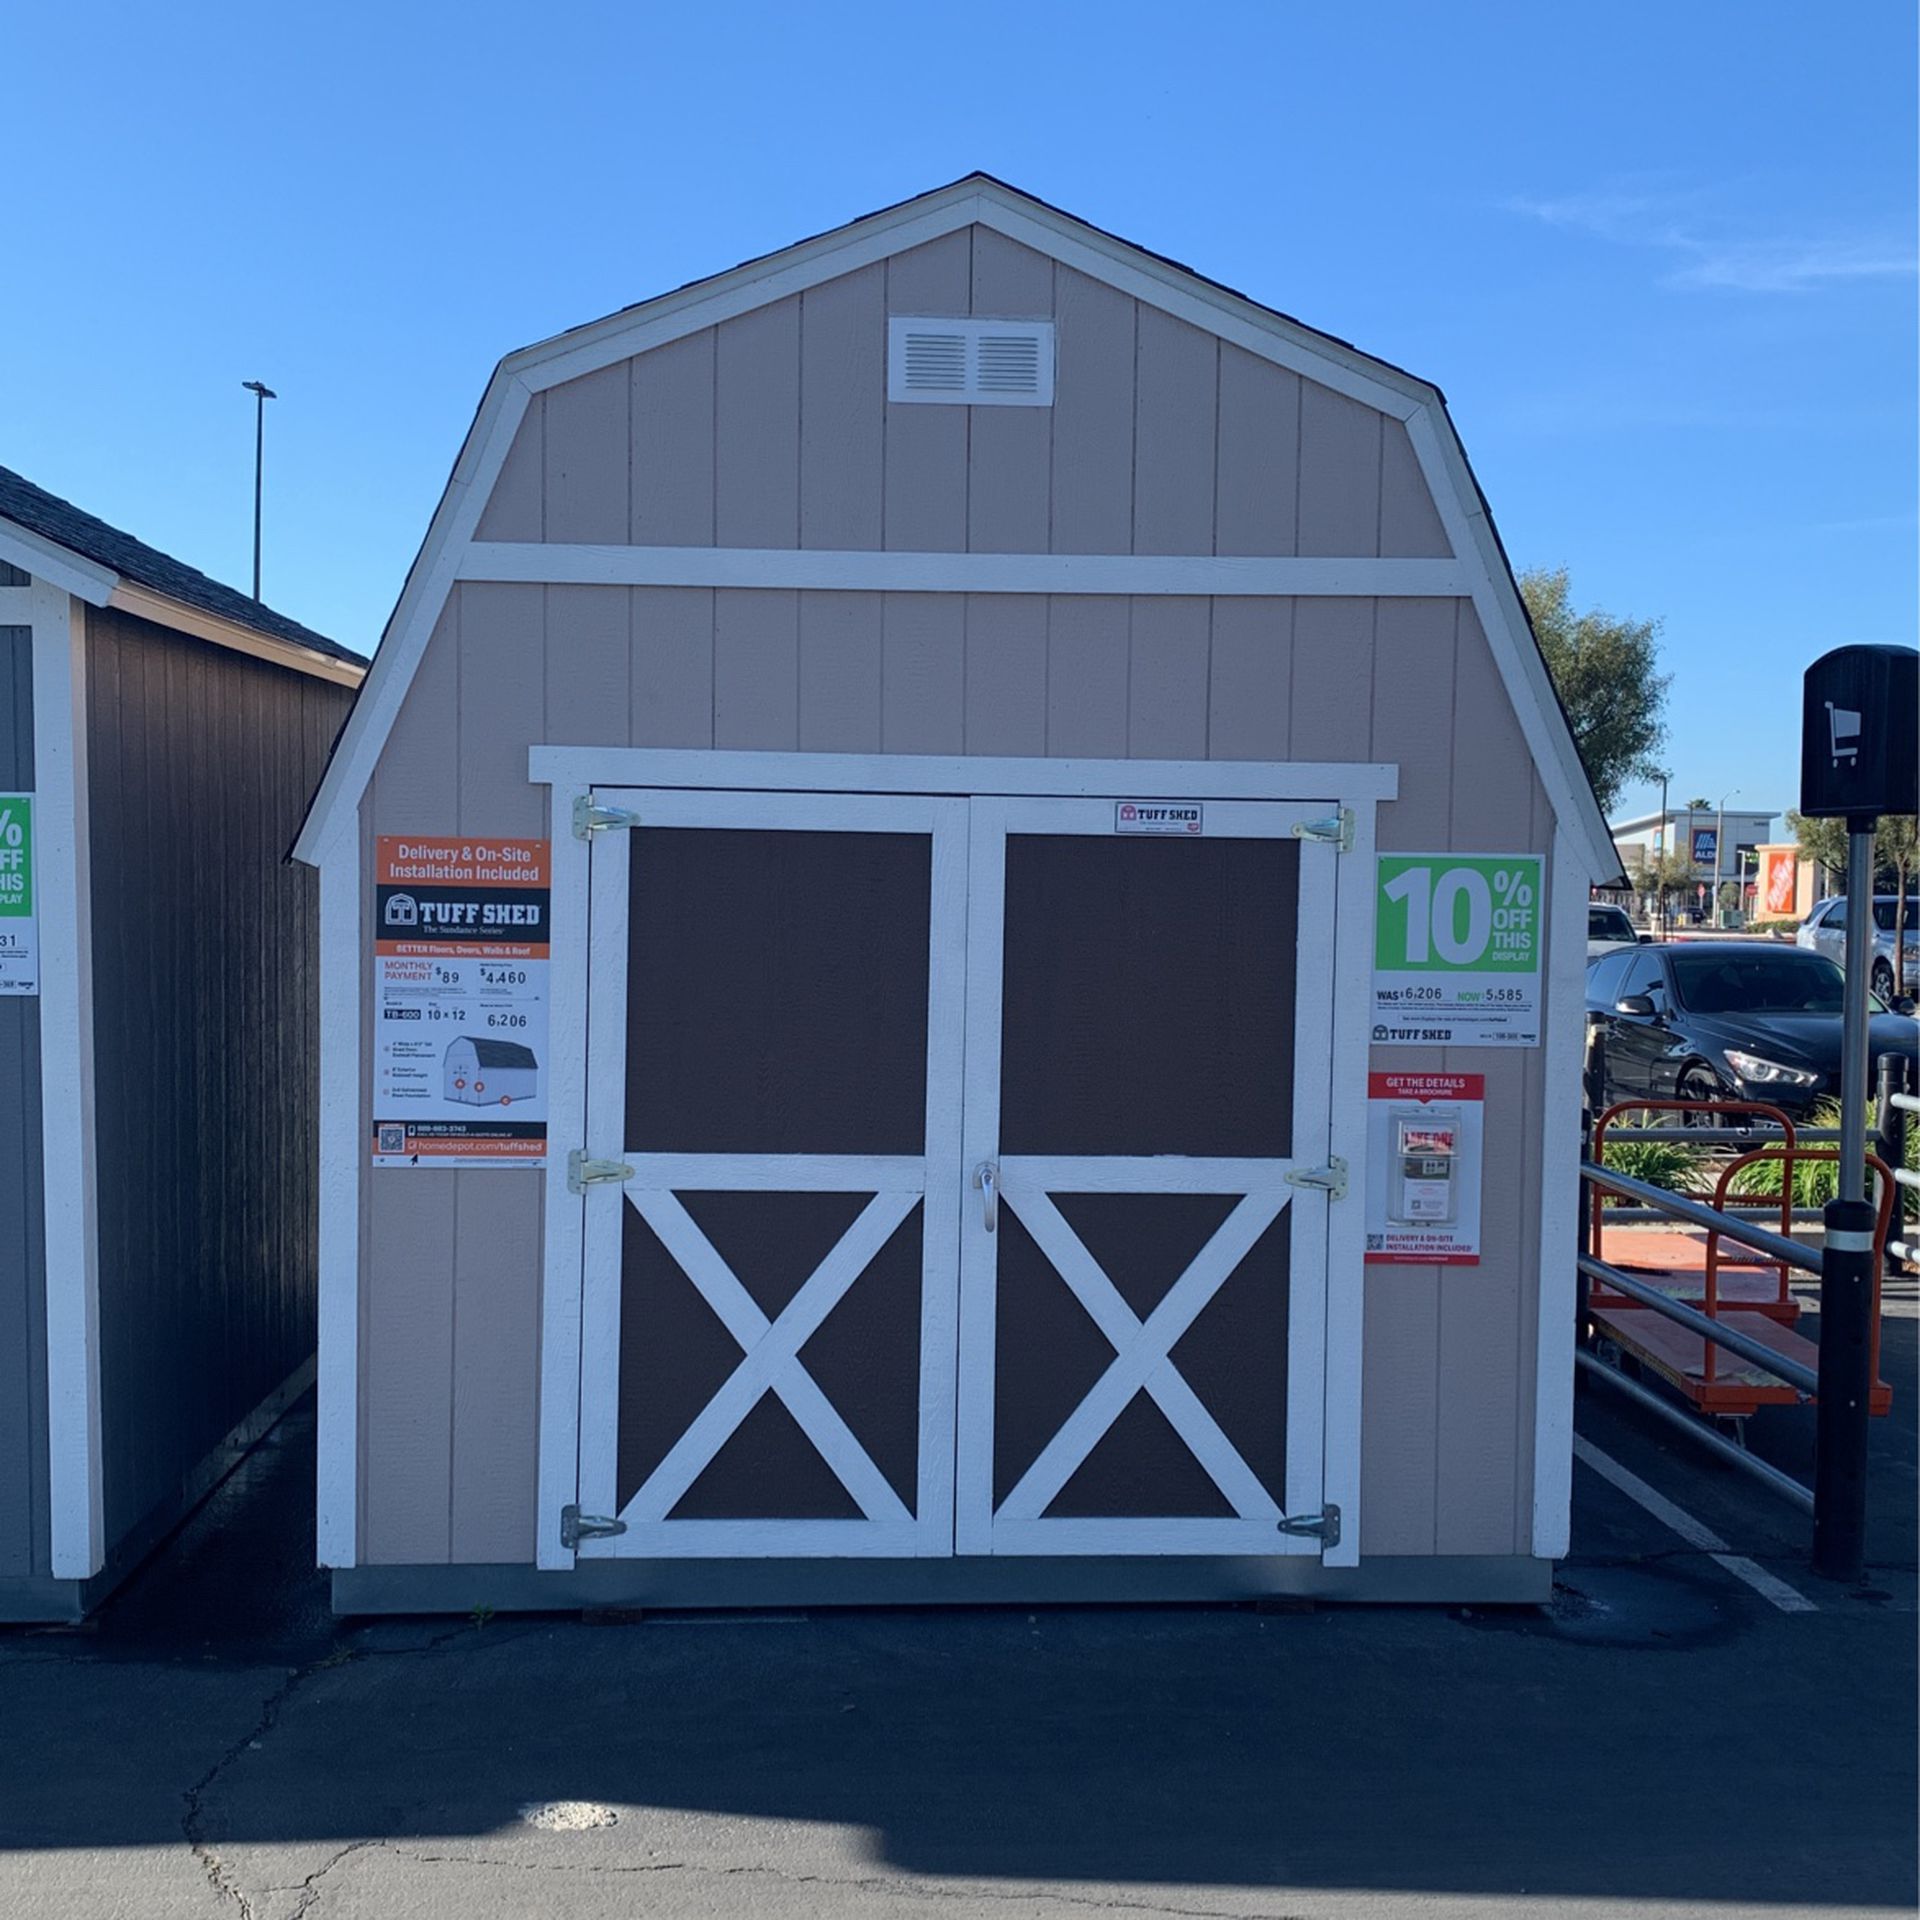 Tuff Shed Sundance TB-600 10x12 Was $6,206 Now $5,585 10% Off Financing Available!